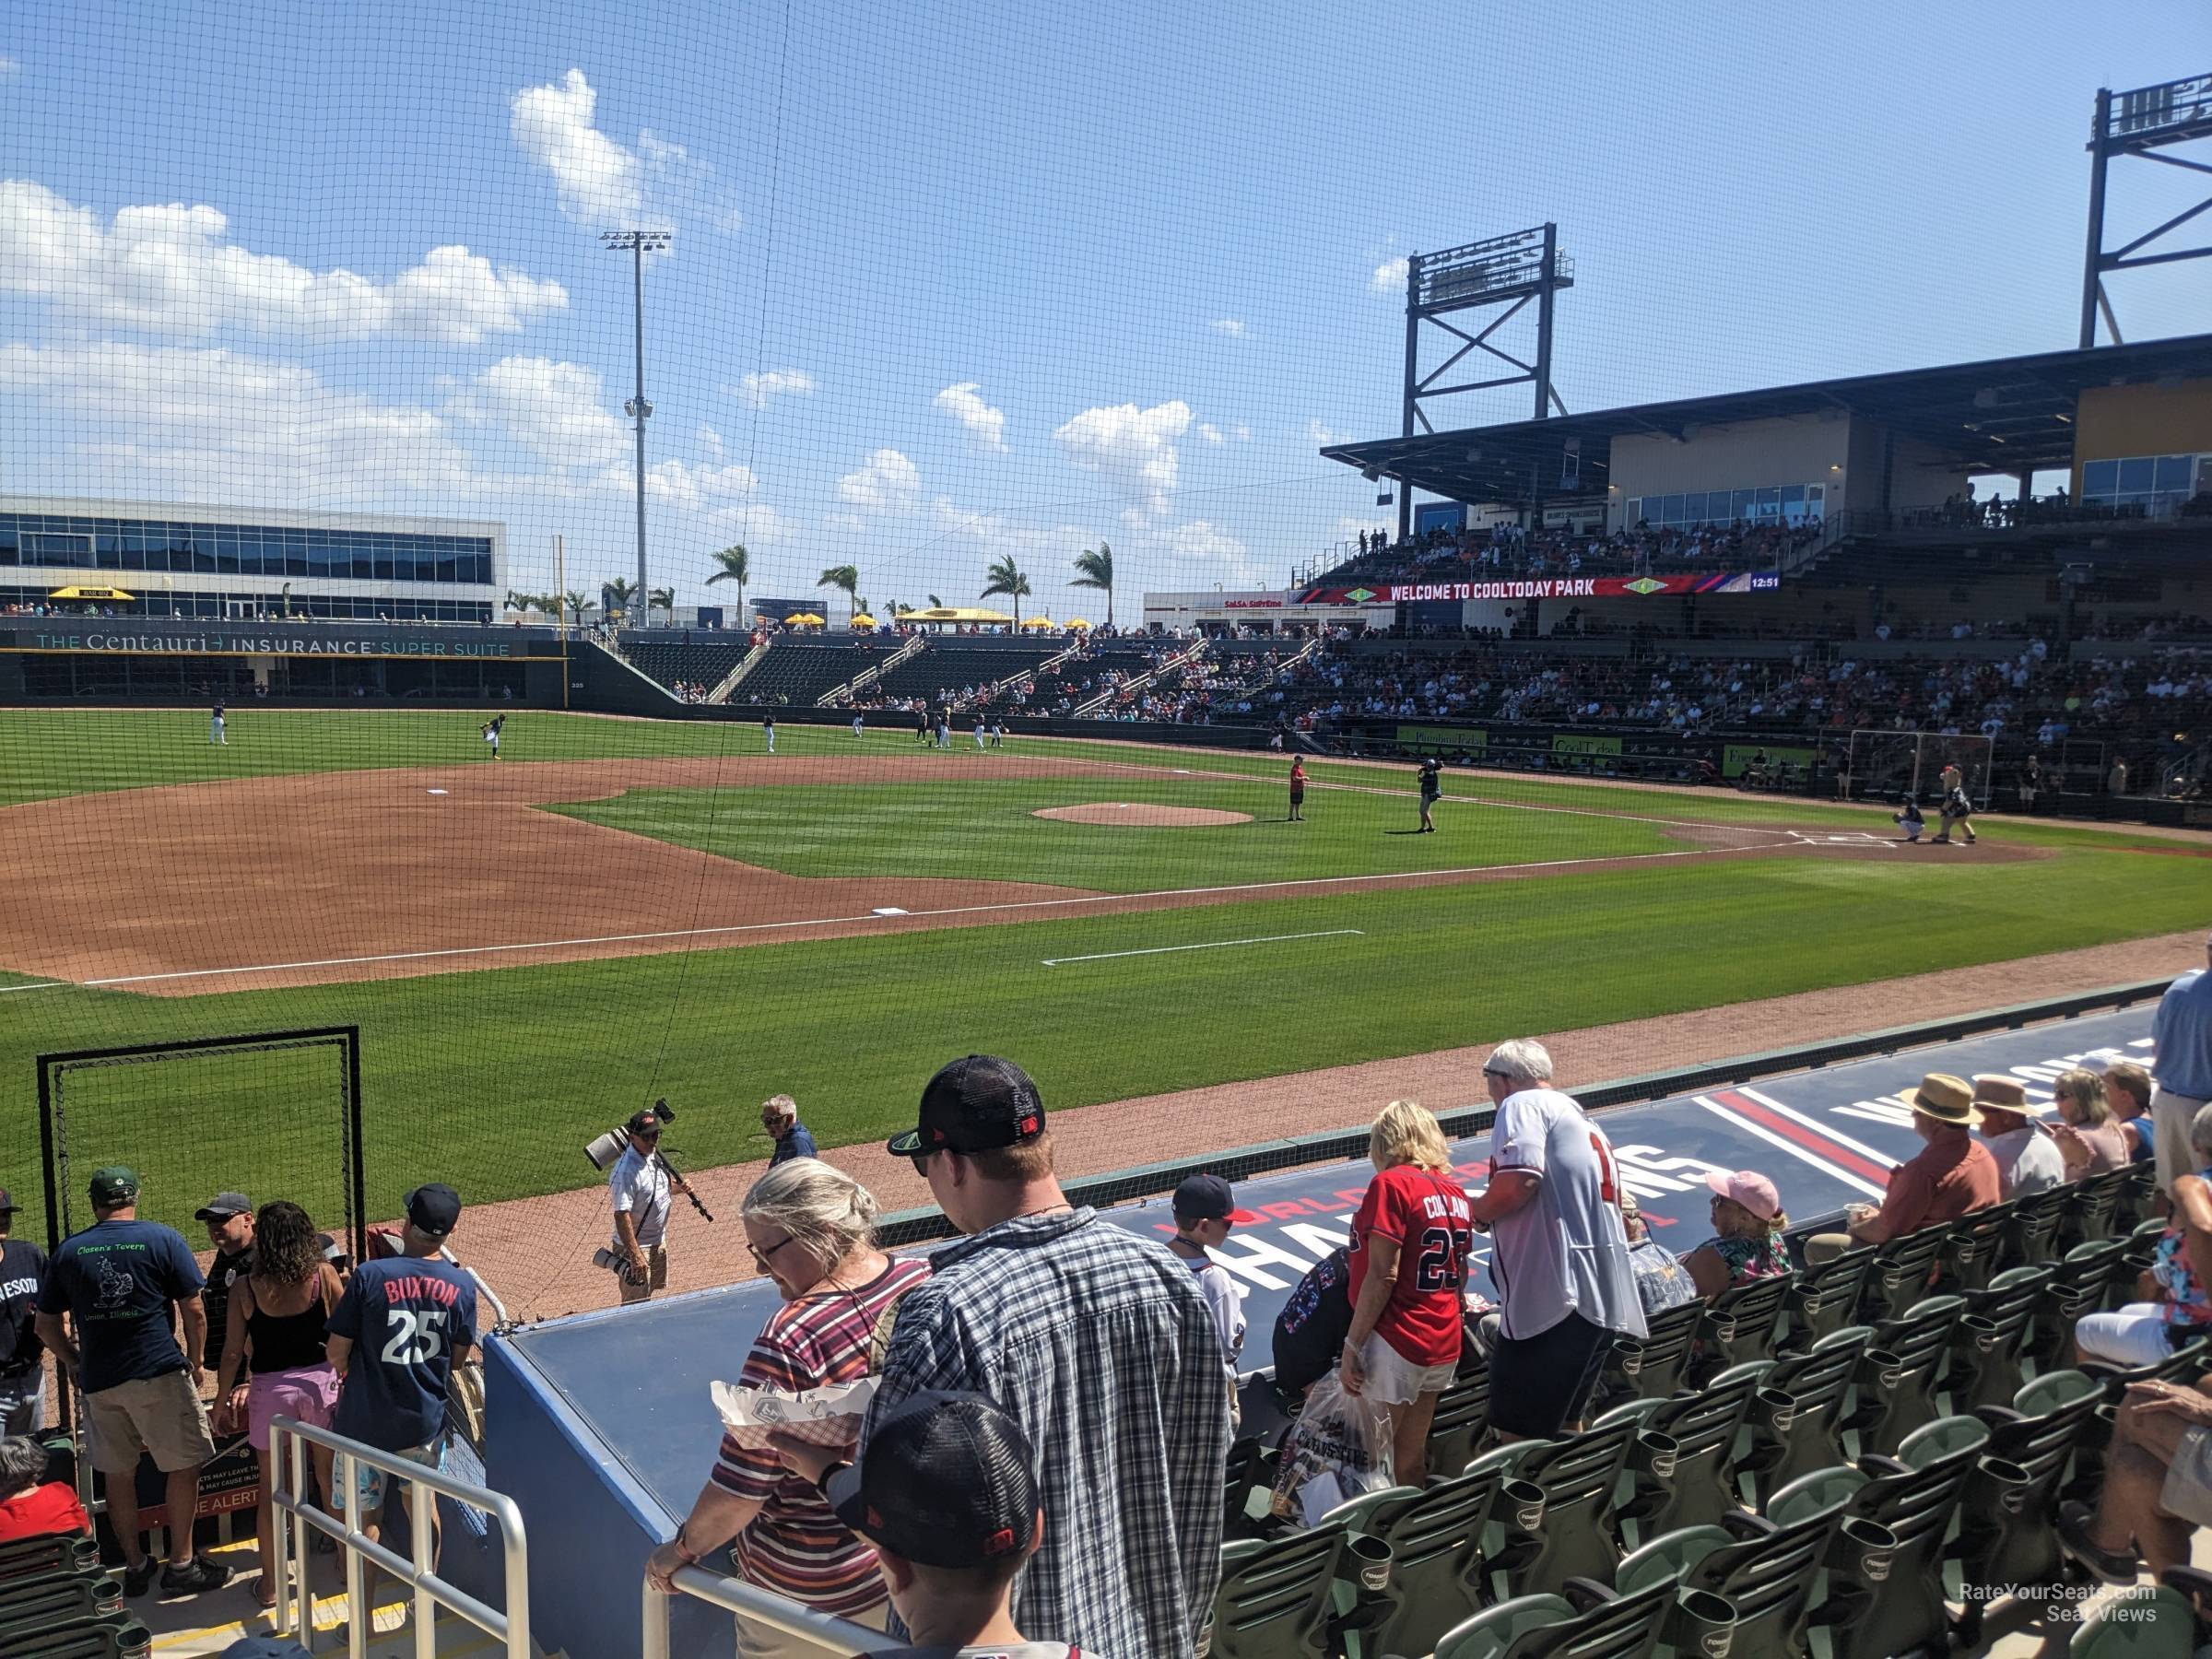 section 118, row 10 seat view  - cooltoday park